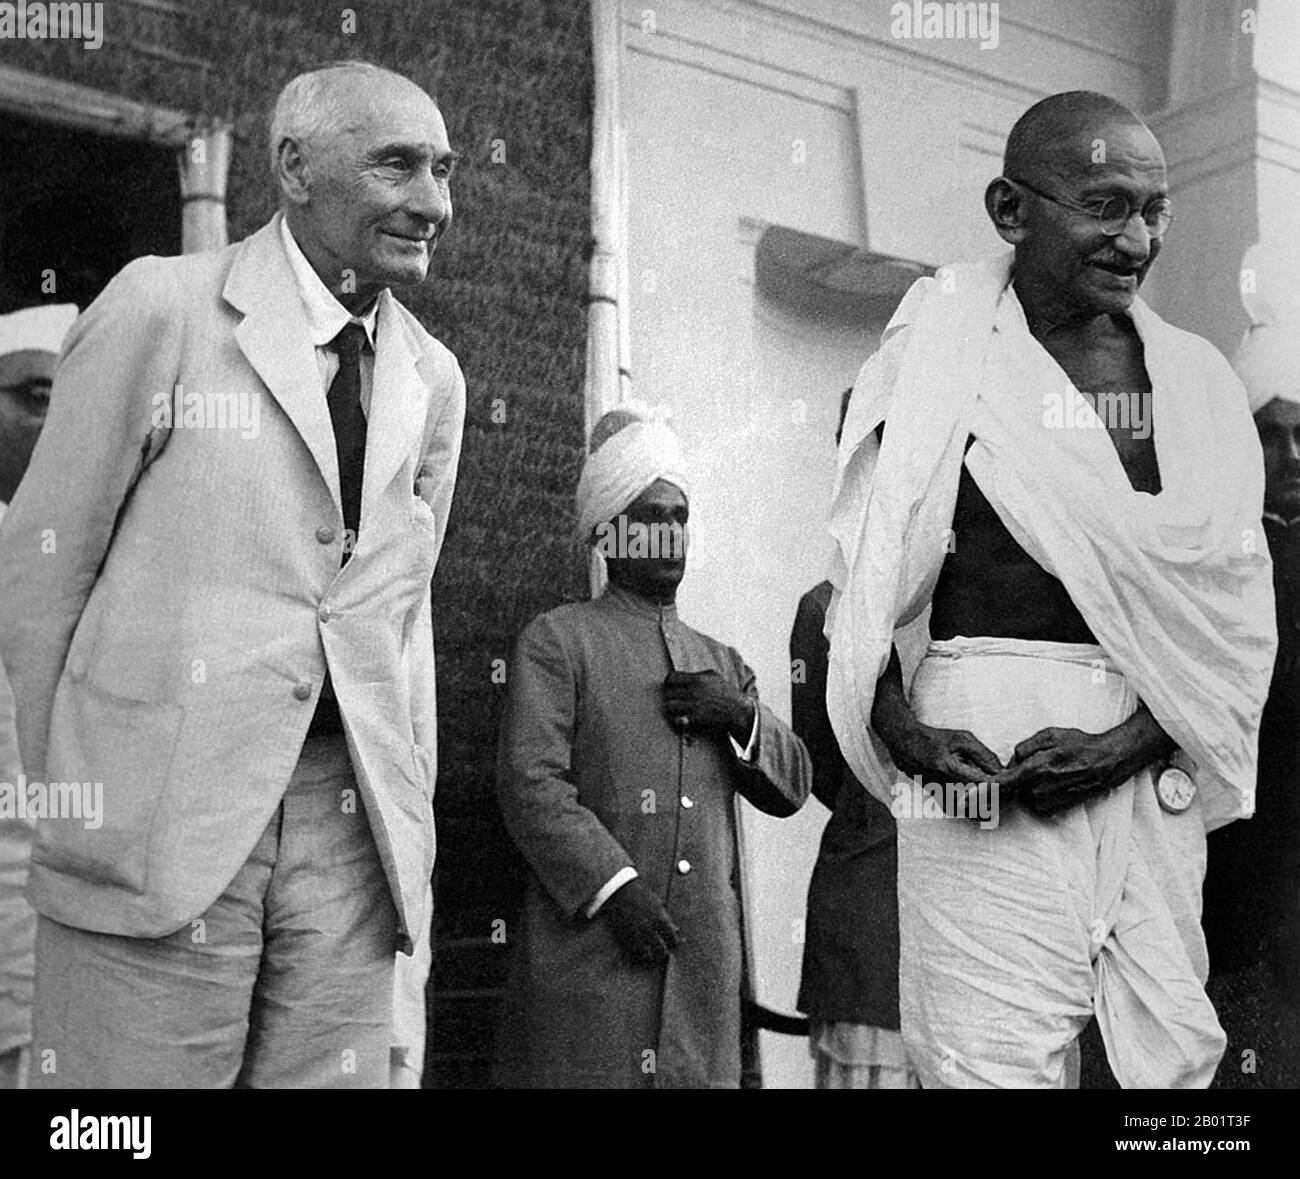 India: Mahatma Gandhi (2 October 1869 - 30 January 1948), leader of India's independence movement, with Lord Pethwick Lawrence, British Secretary of State for India, Delhi, 18 April 1946.  Mohandas Karamchand Gandhi was the preeminent political and ideological leader of India during the Indian independence movement. He pioneered satyagraha. This is defined as resistance to tyranny through mass civil disobedience, a philosophy firmly founded upon ahimsa, or total non-violence. This concept helped India gain independence and inspired movements for civil rights and freedom across the world. Stock Photo